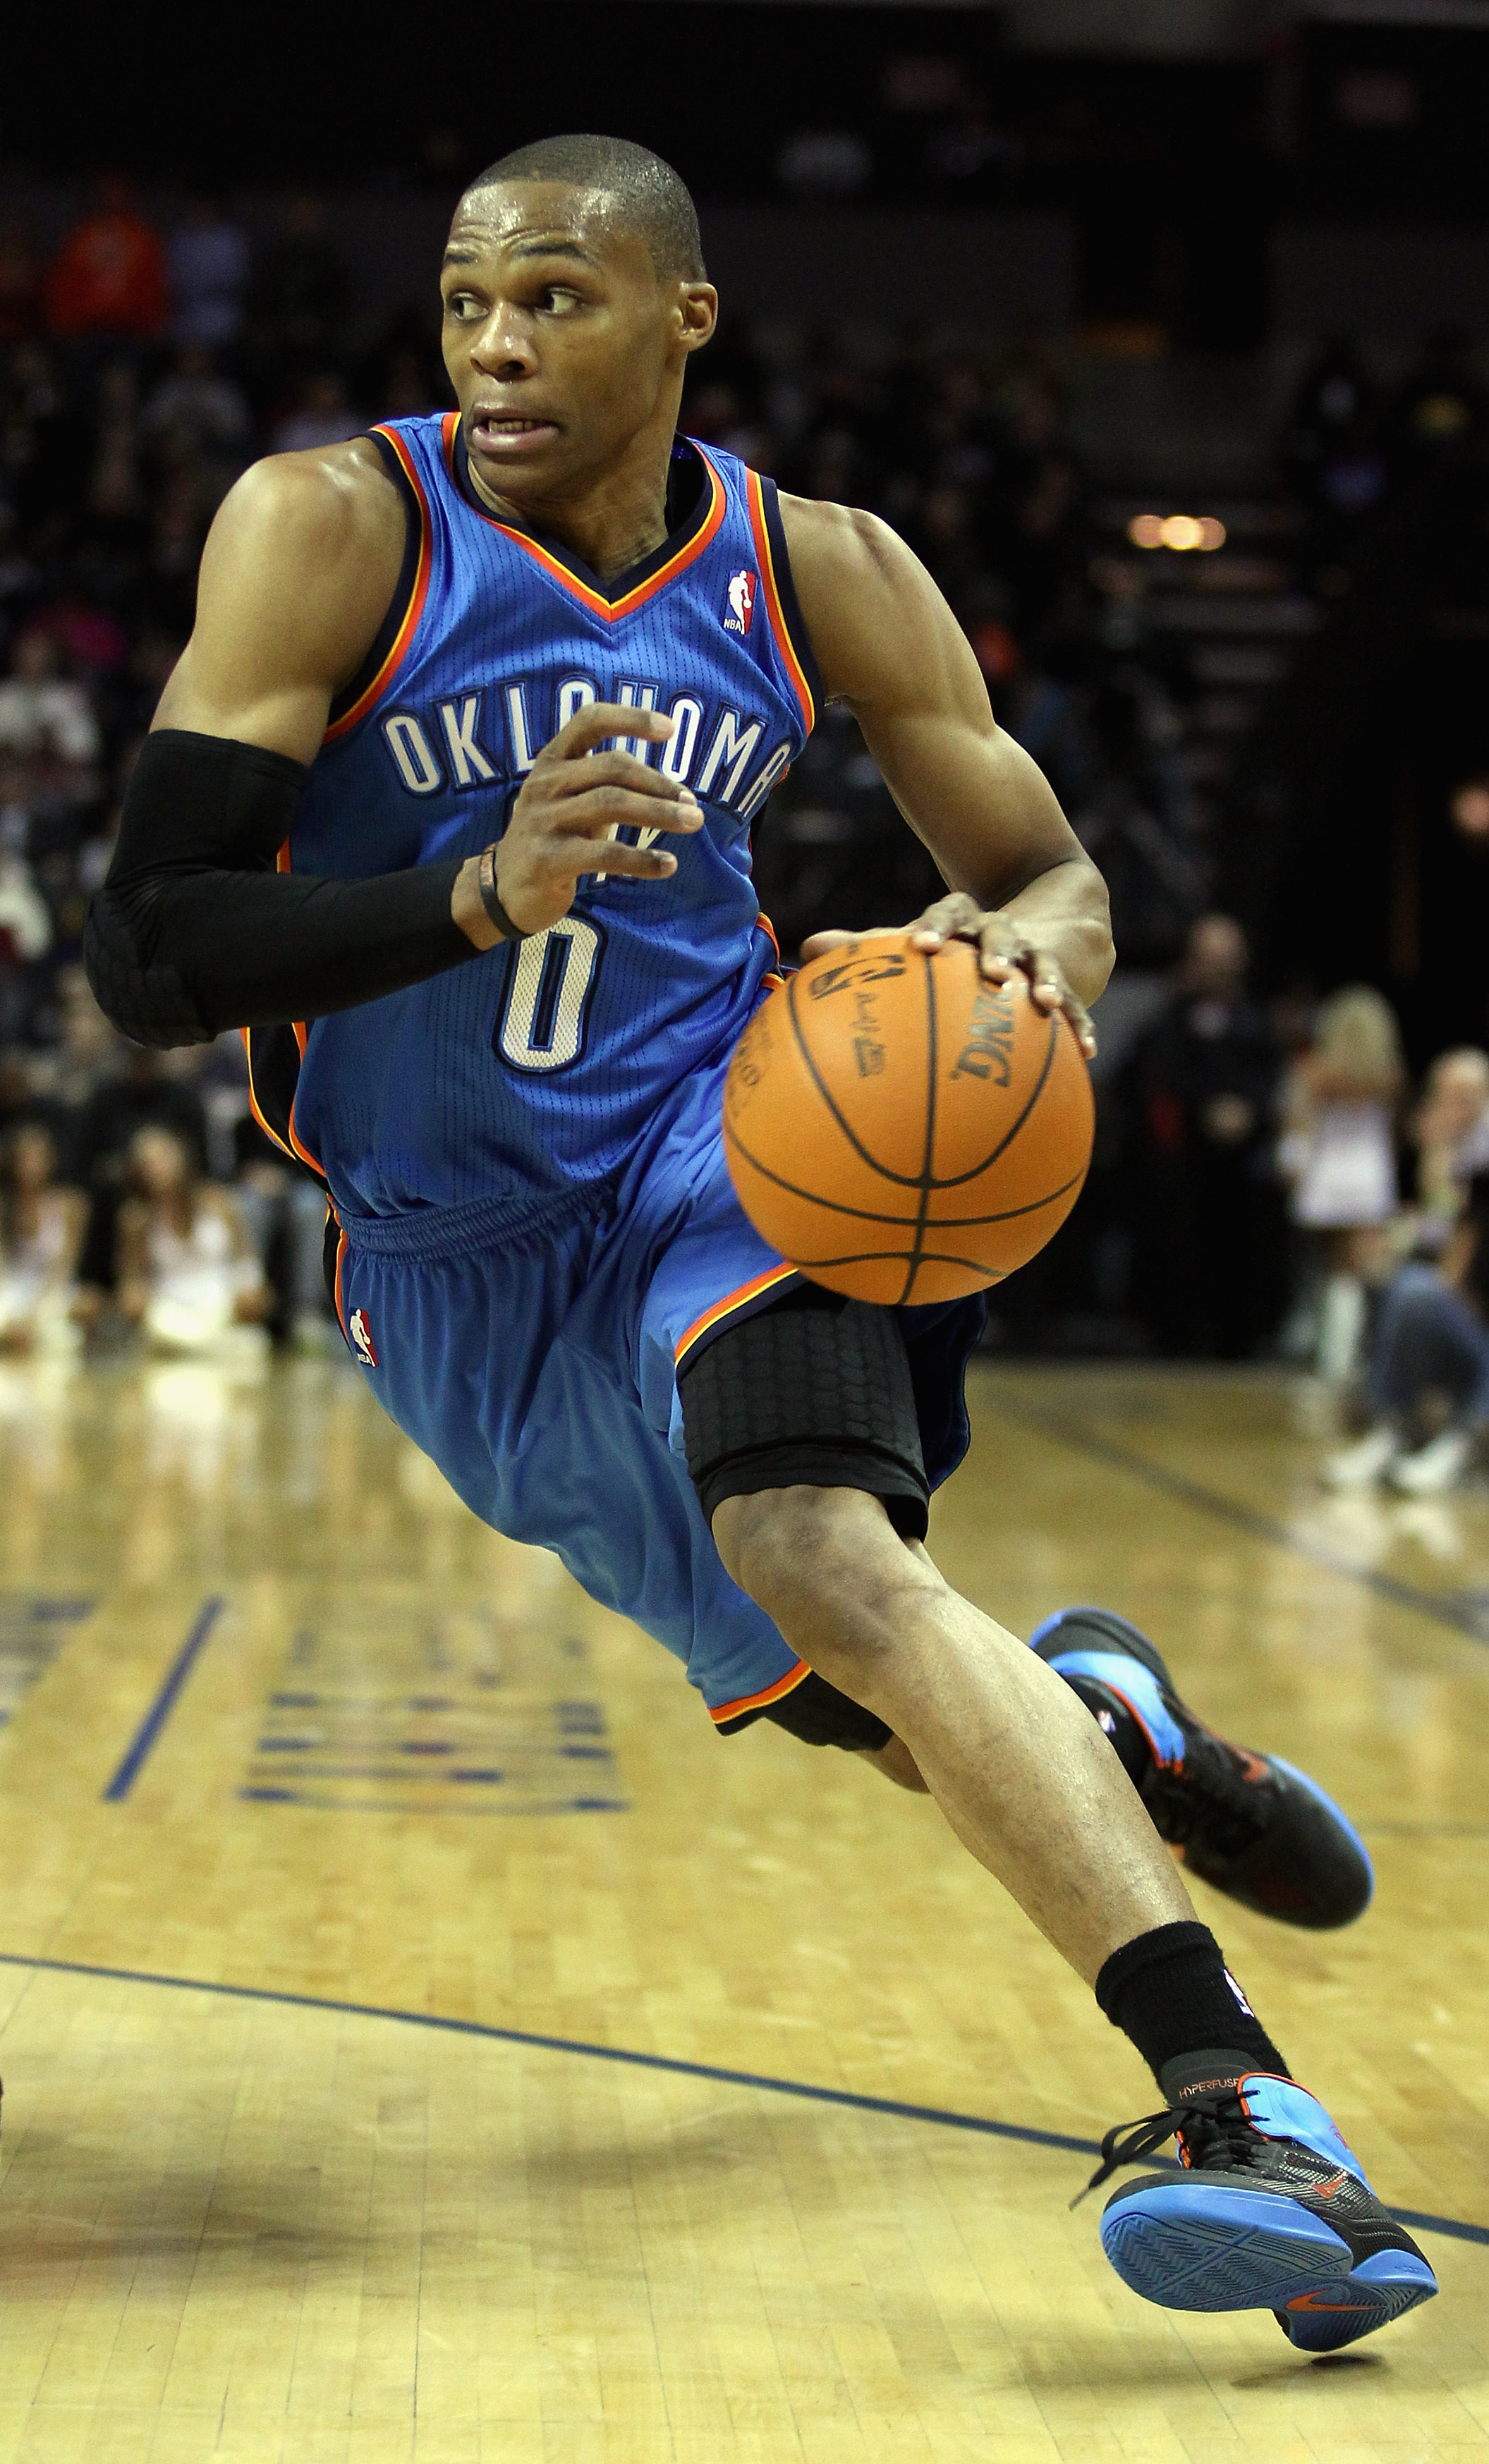 CHARLOTTE, NC - DECEMBER 21:  Russell Westbrook #0 of the Oklahoma City Thunder drives to the basket against the Charlotte Bobcats during their game at Time Warner Cable Arena on December 21, 2010 in Charlotte, North Carolina. NOTE TO USER: User expressly